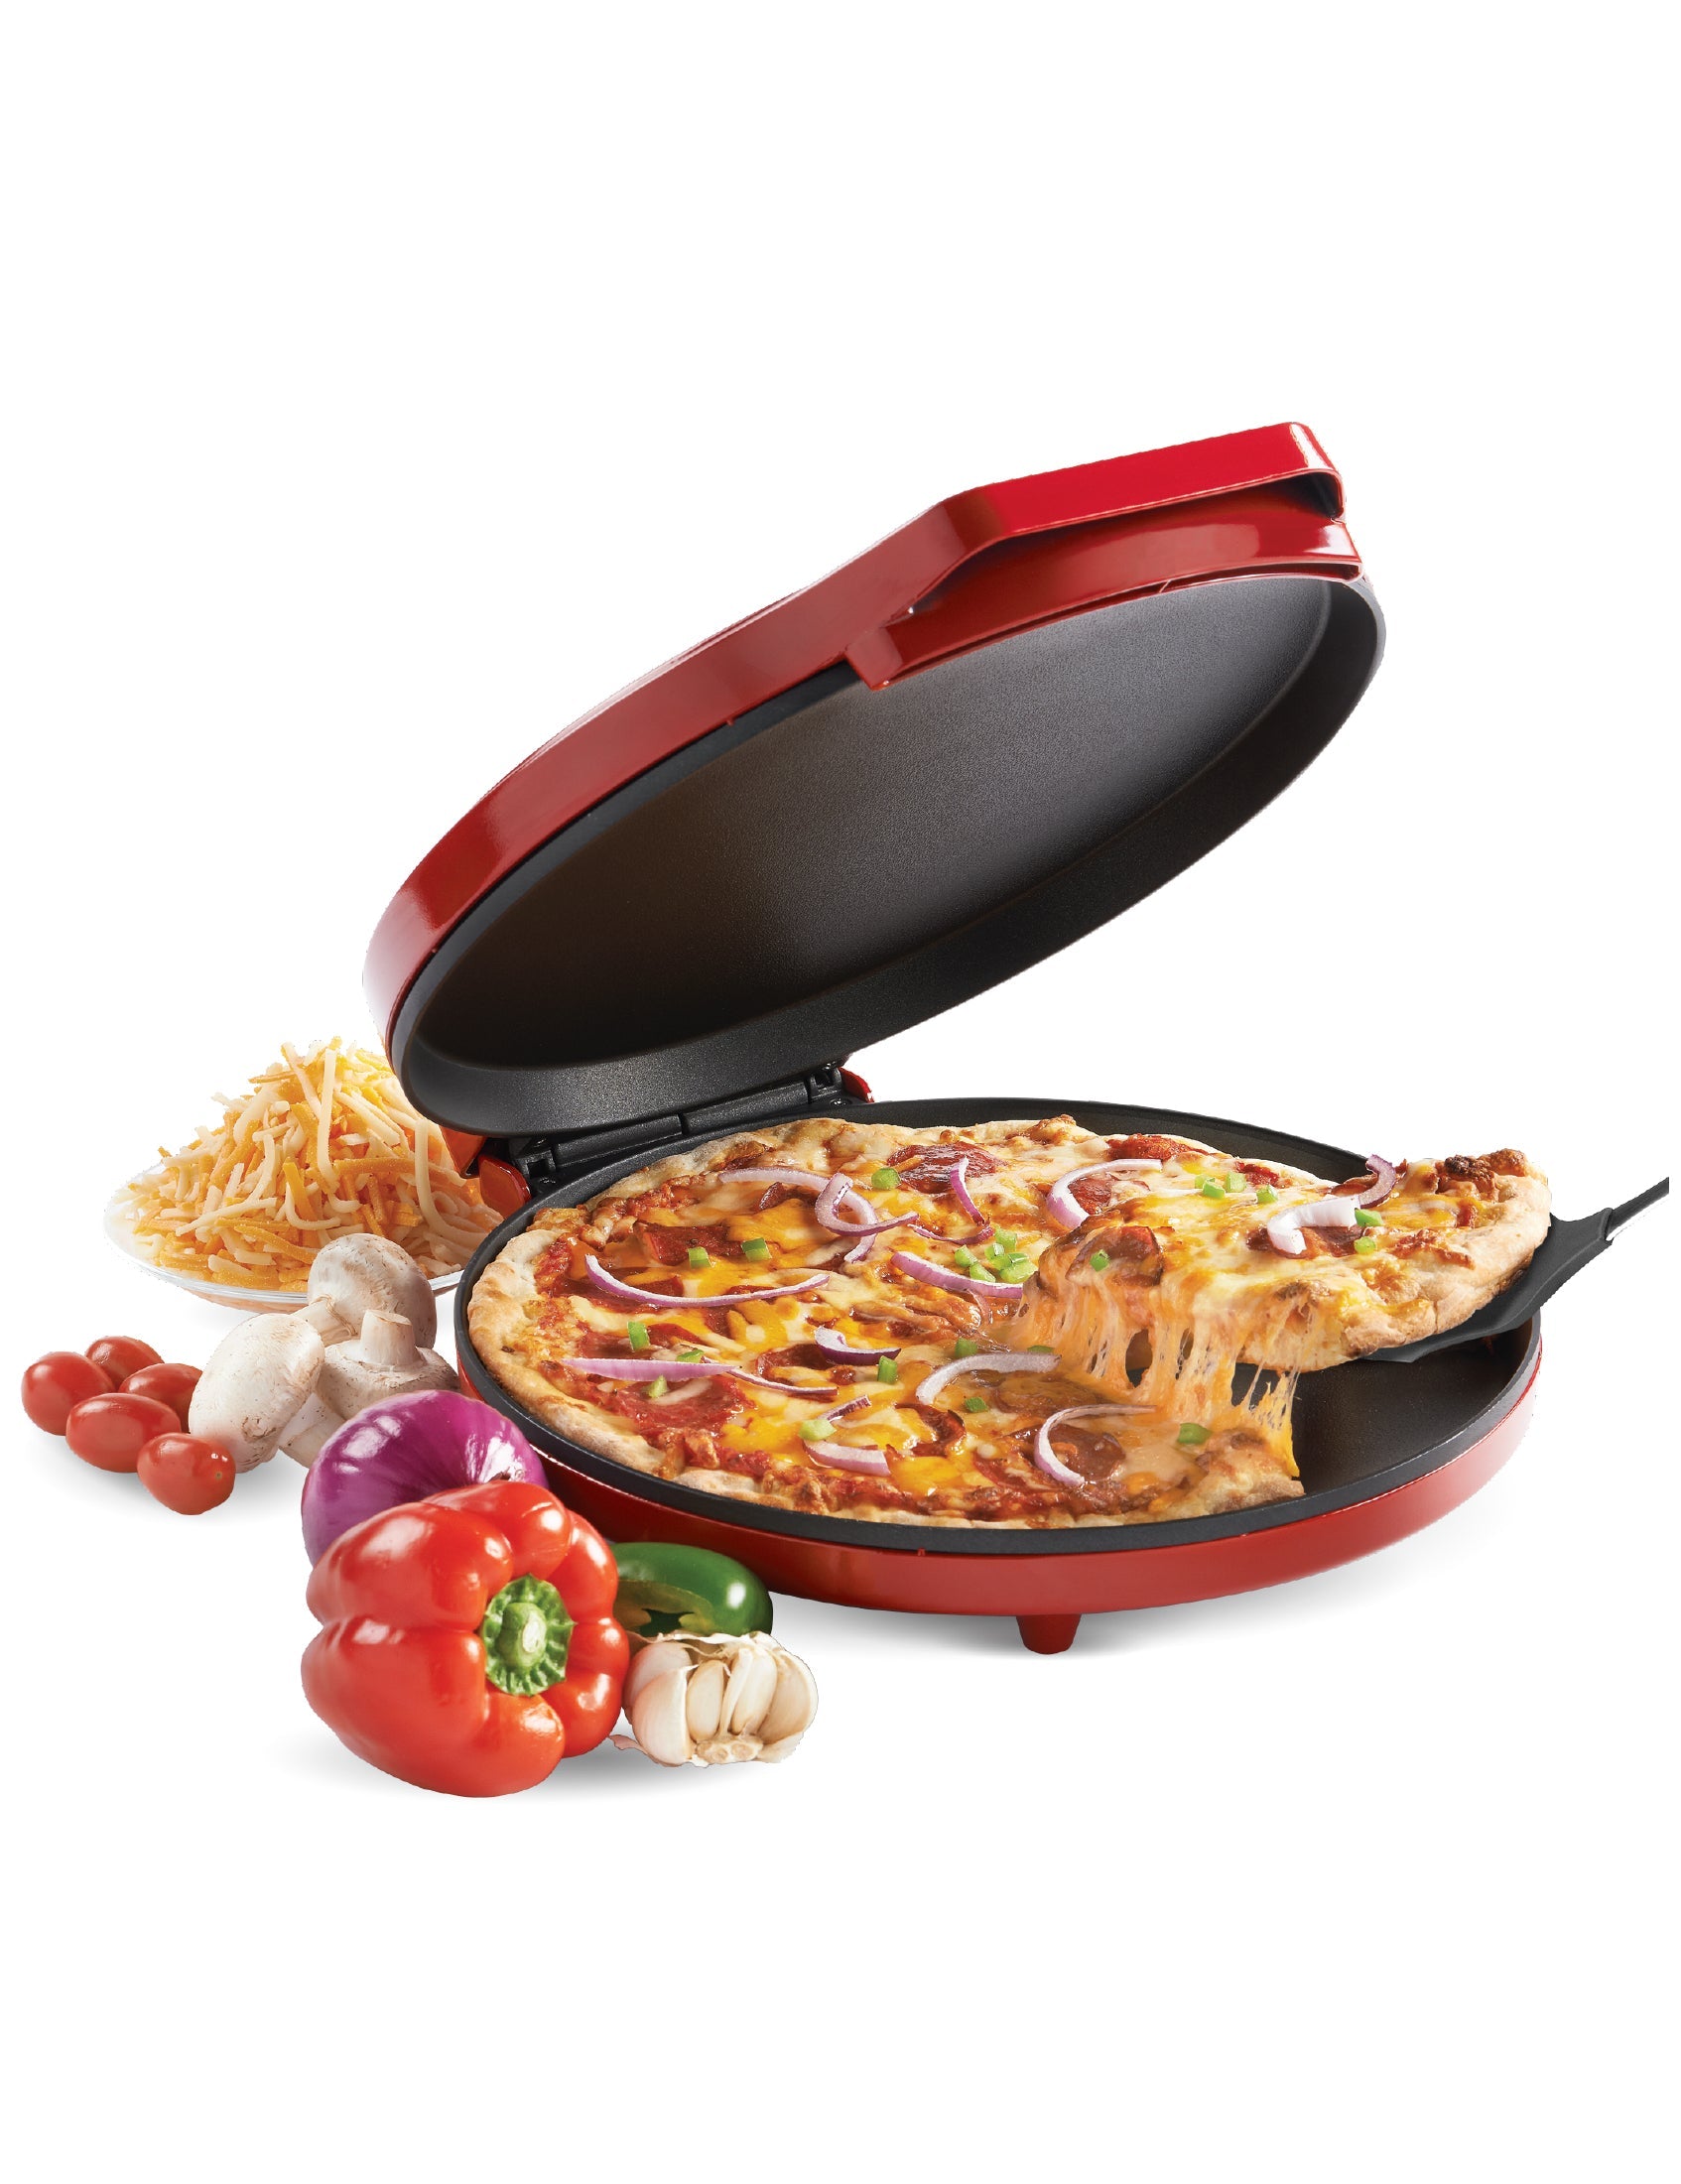 BETTY CROCKER Personal Nonstick Ceramic Heater for Pizzas and More, Red